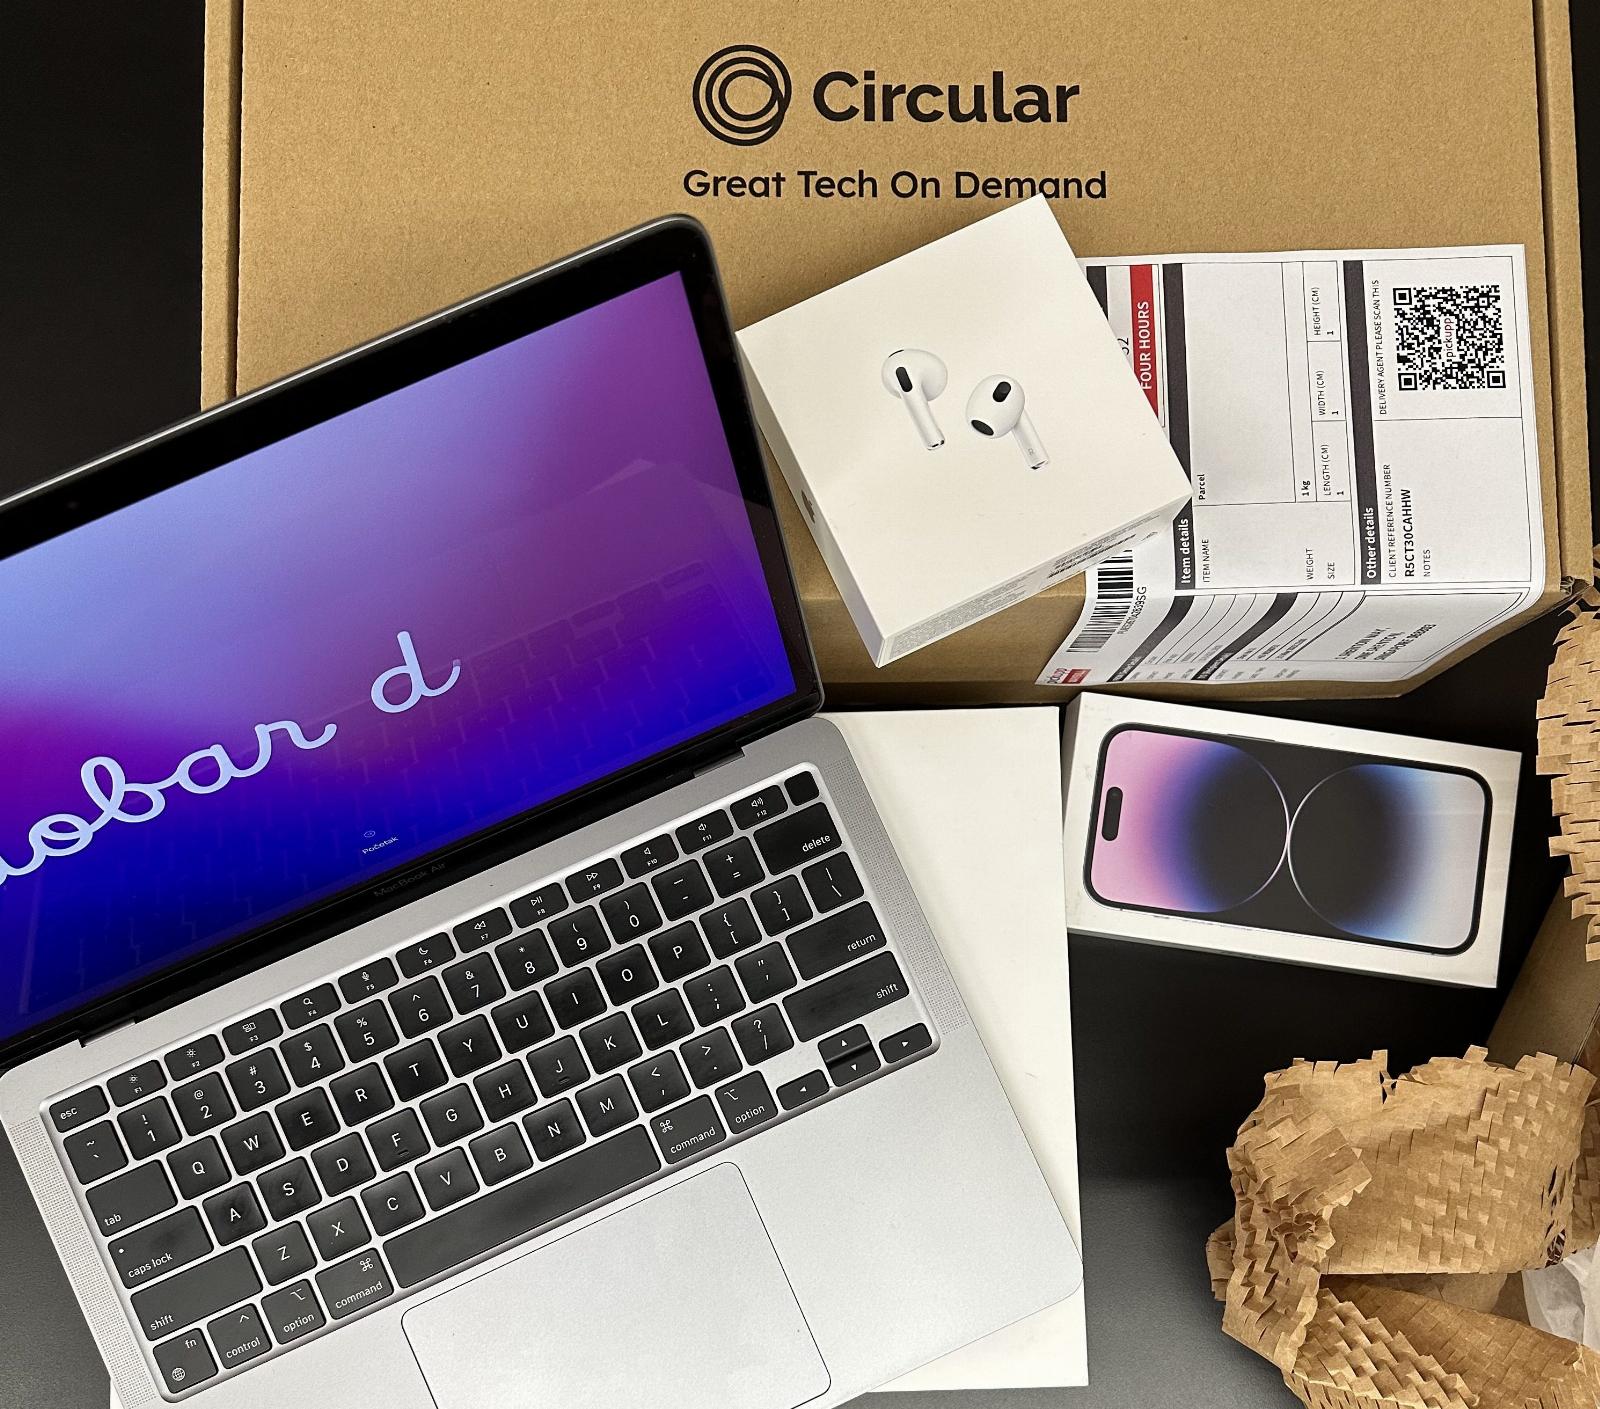 Singapore’s tech subscription service Circular wants to keep devices out of the landfill